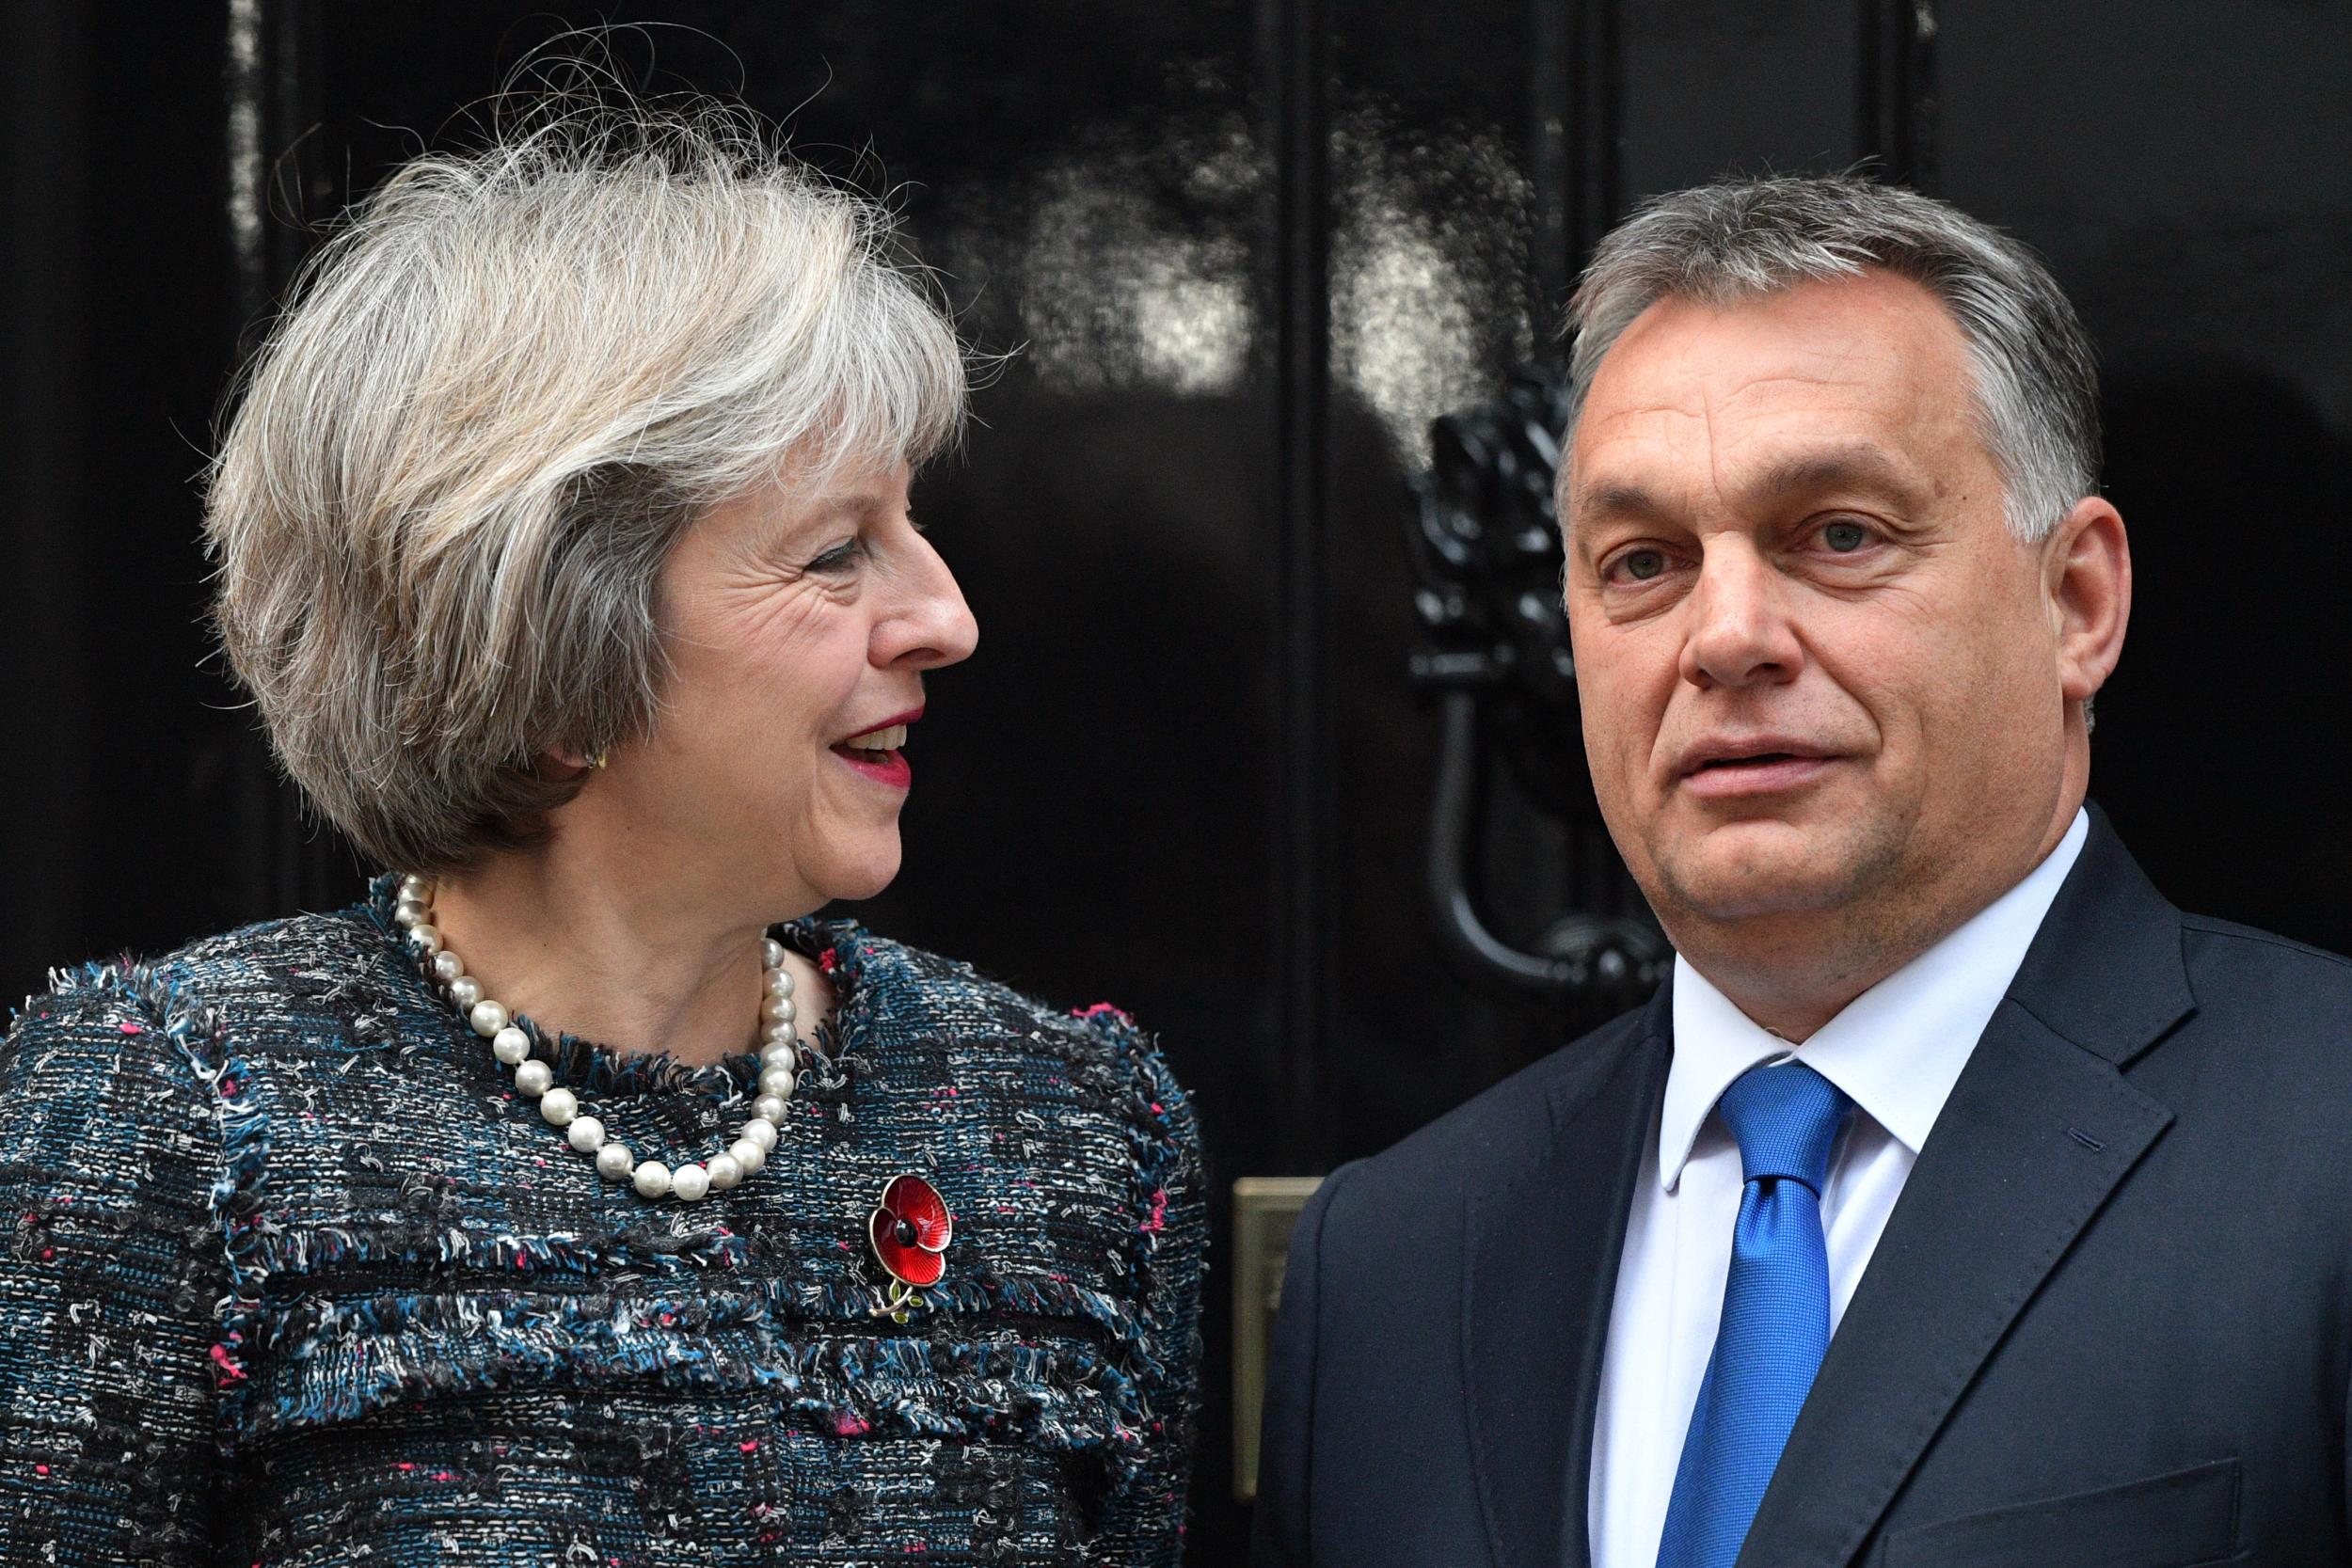 Theresa May invited Hungarian prime minister Viktor Orban to Downing Street in 2016 shortly after she became prime minister